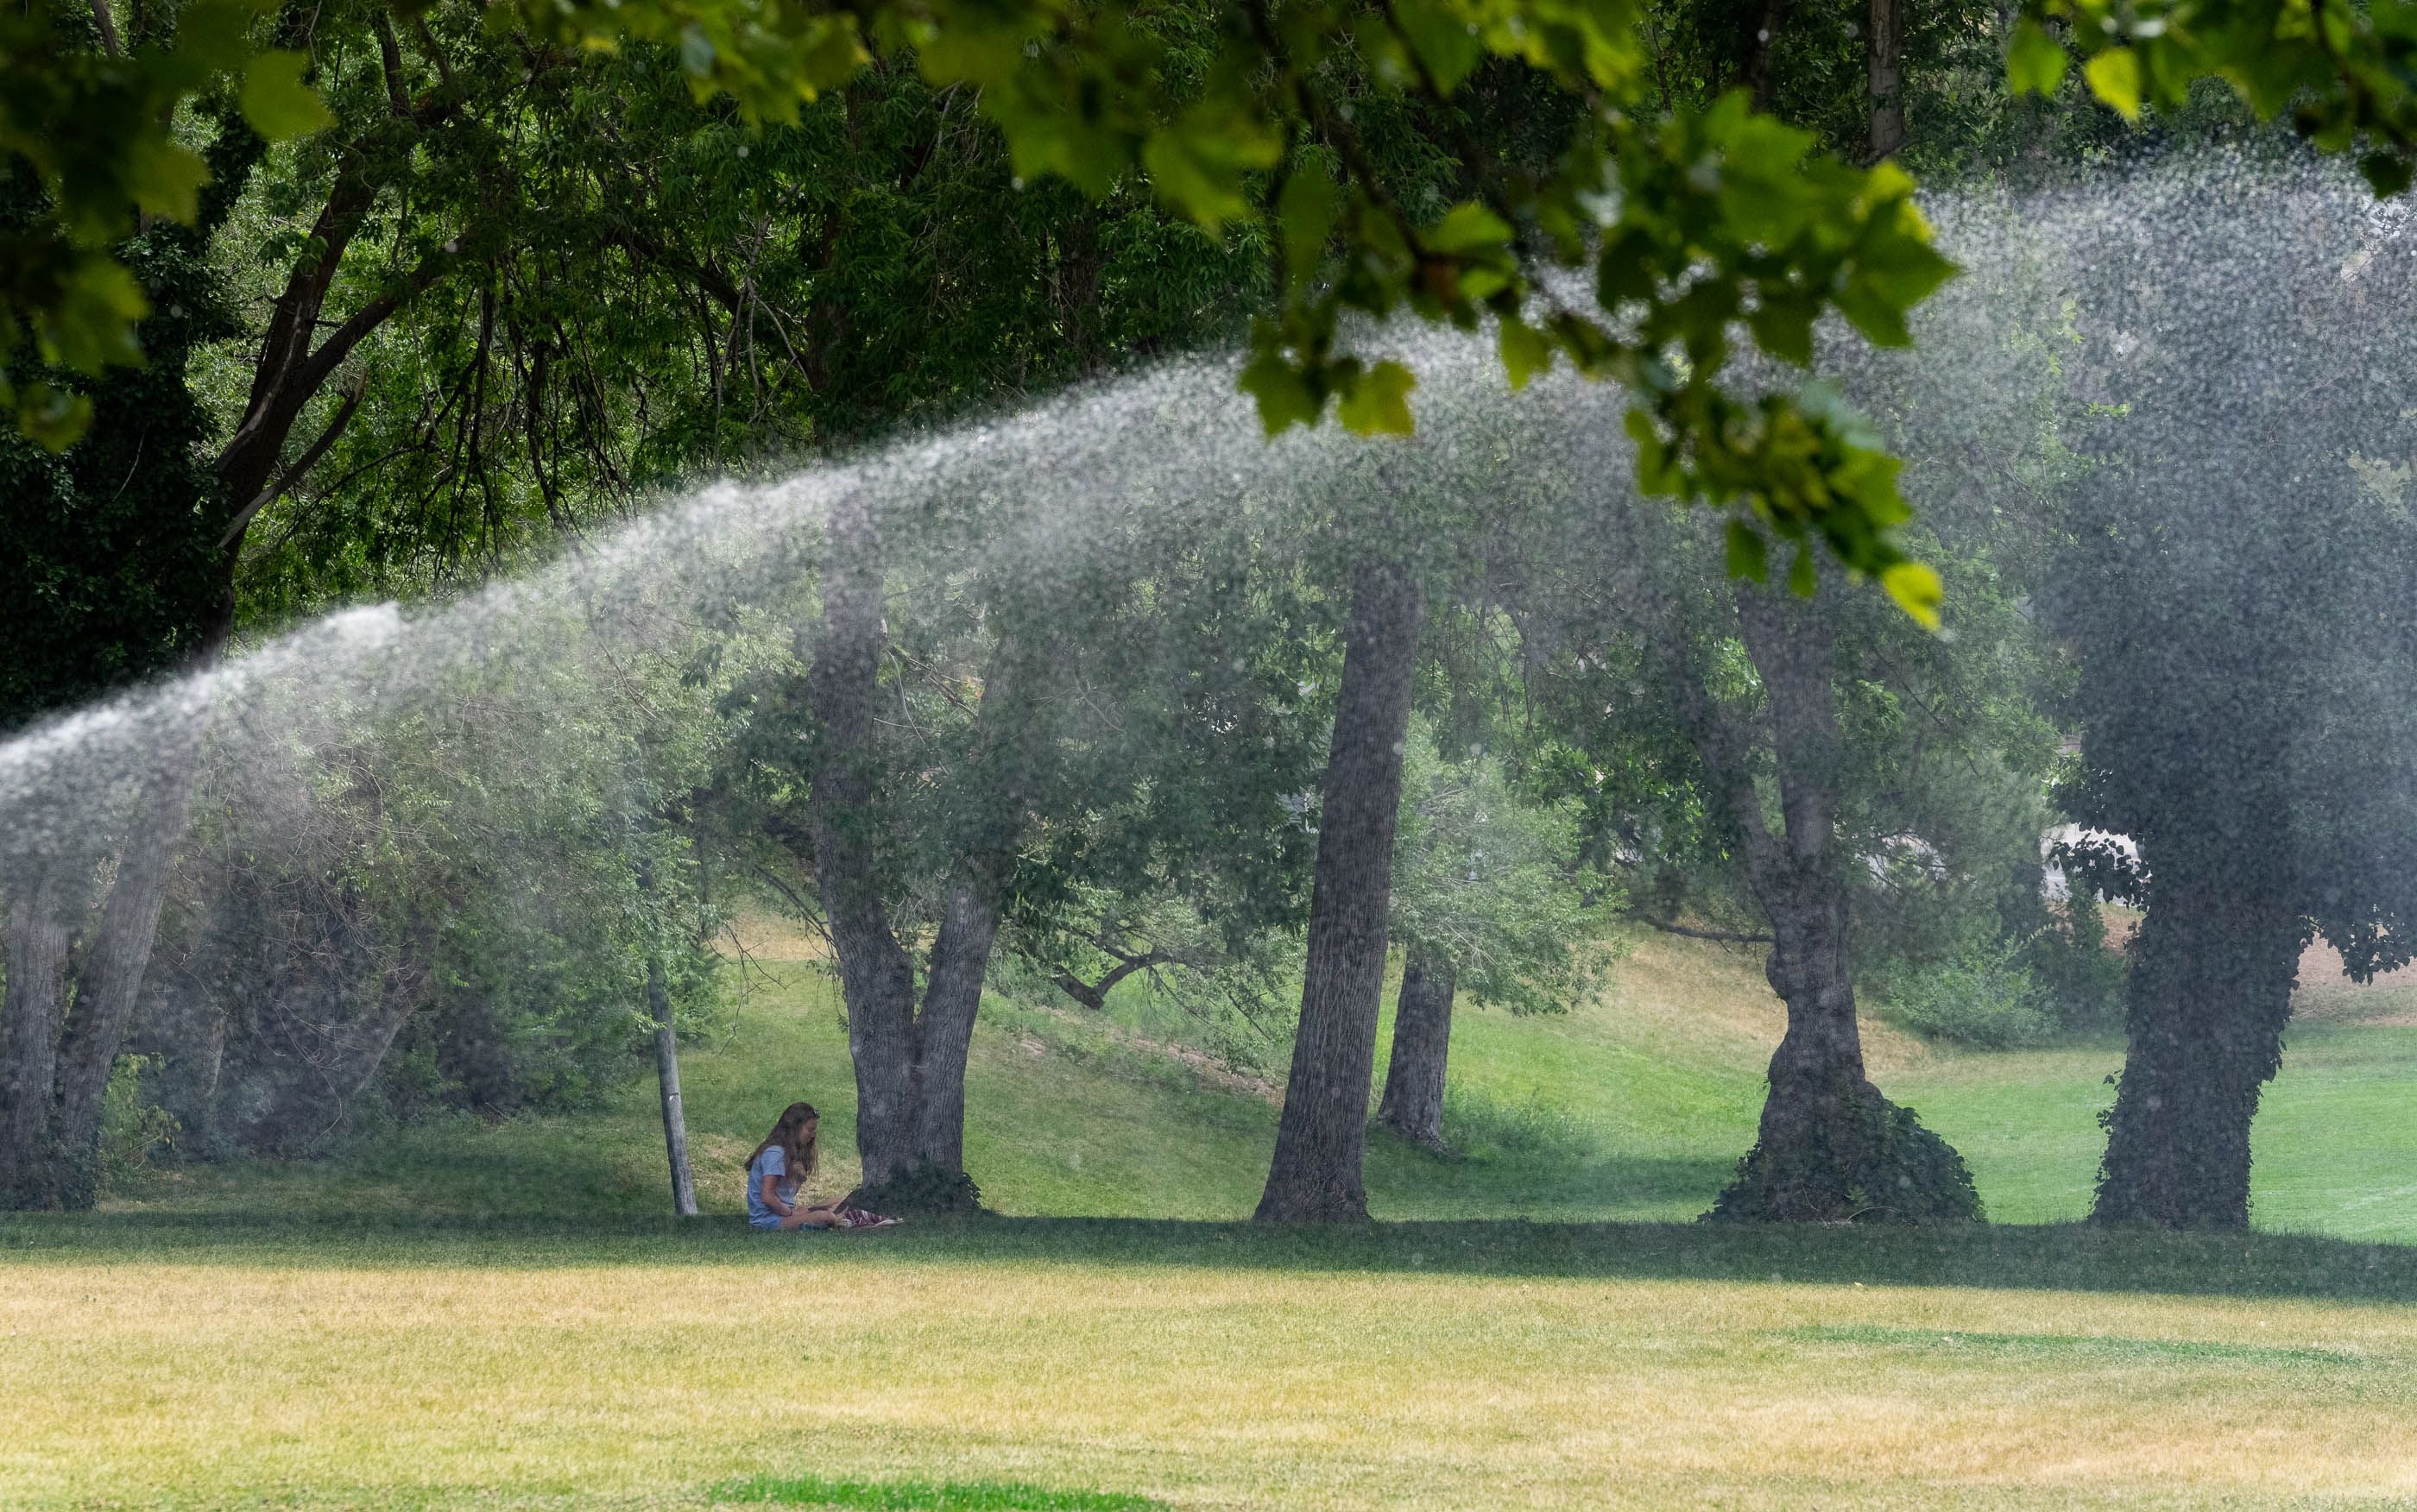 (Francisco Kjolseth | The Salt Lake Tribune) Sprinklers run at Reservoir Park in the middle of the afternoon heat during peak evaporations times on Monday afternoon, July 19, 2021, near the University of Utah campus.